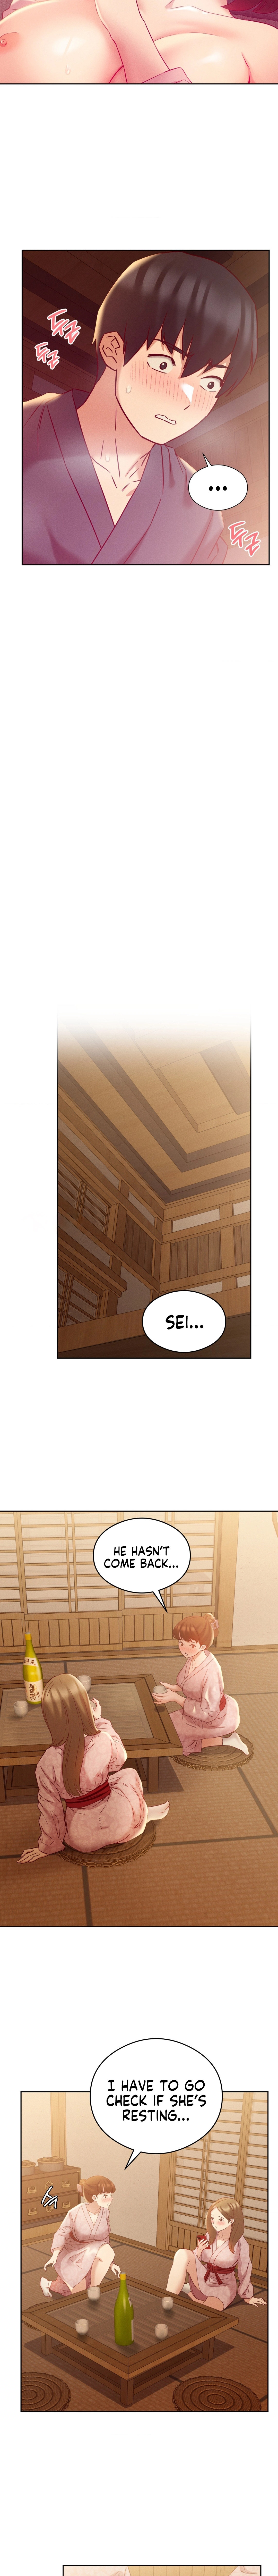 Shall We Go To The Ryokan Together? - Chapter 3 Page 12